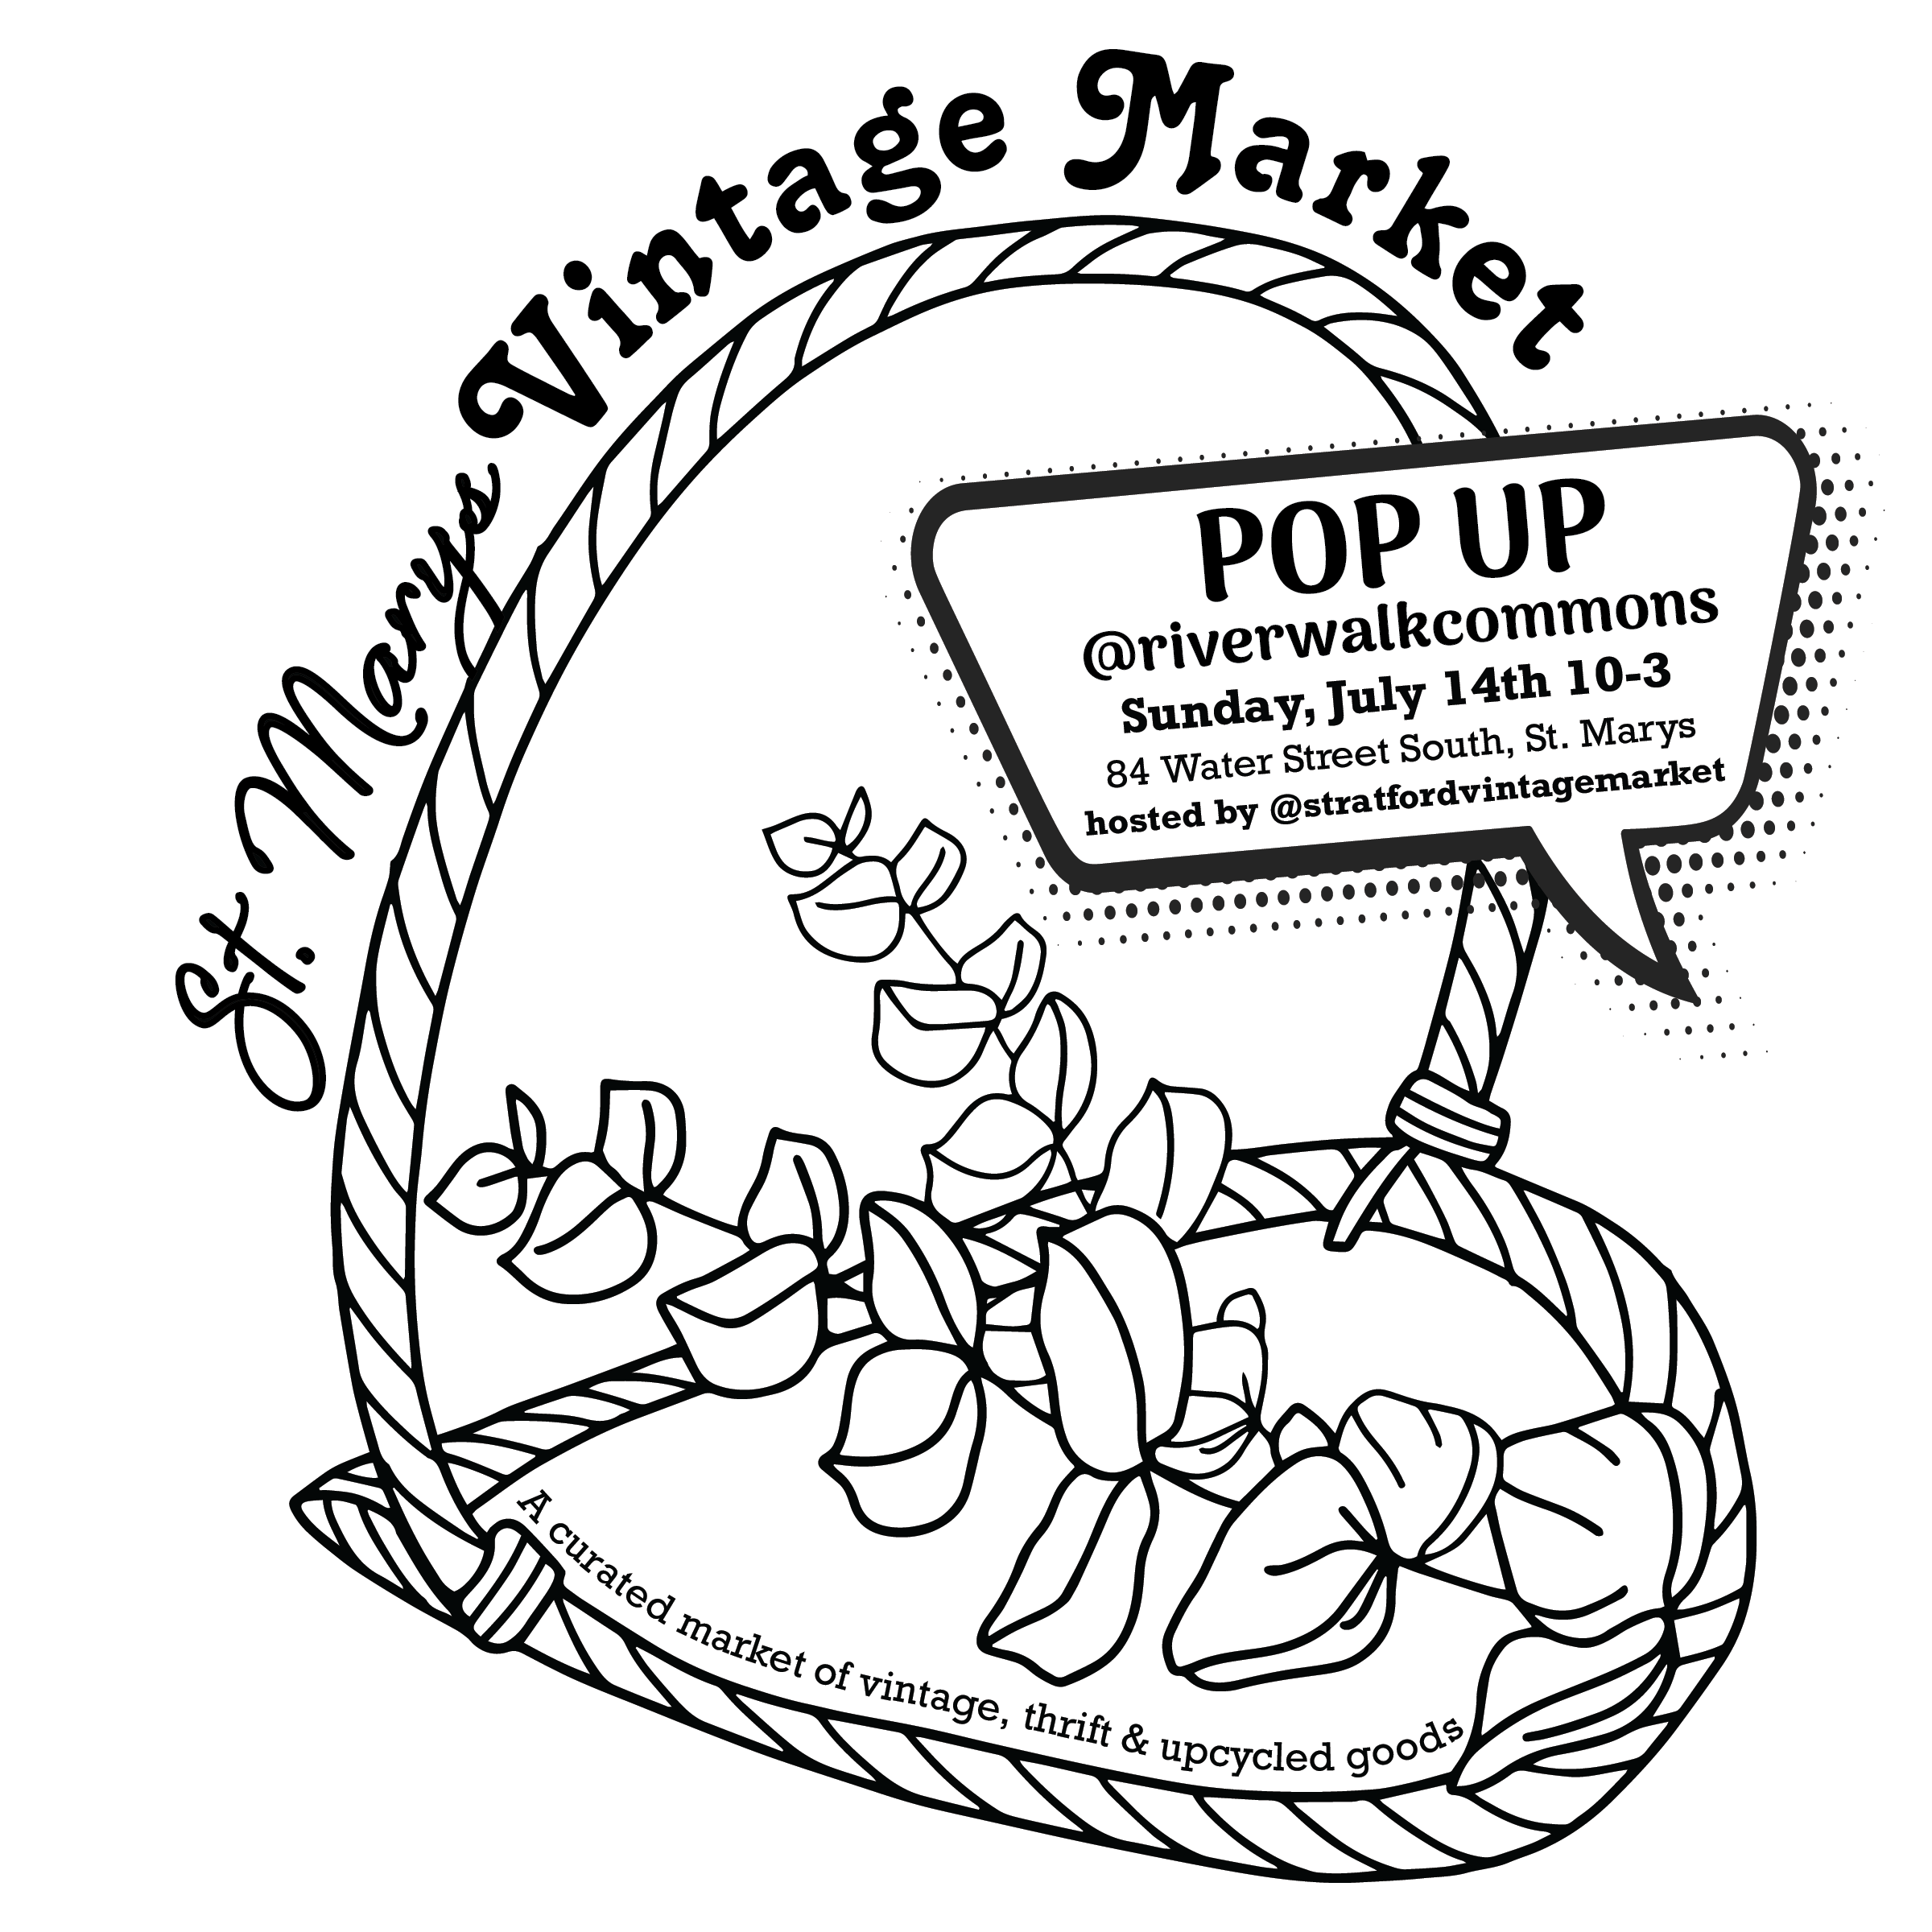 A logo representing a Vintage Market in St. Marys